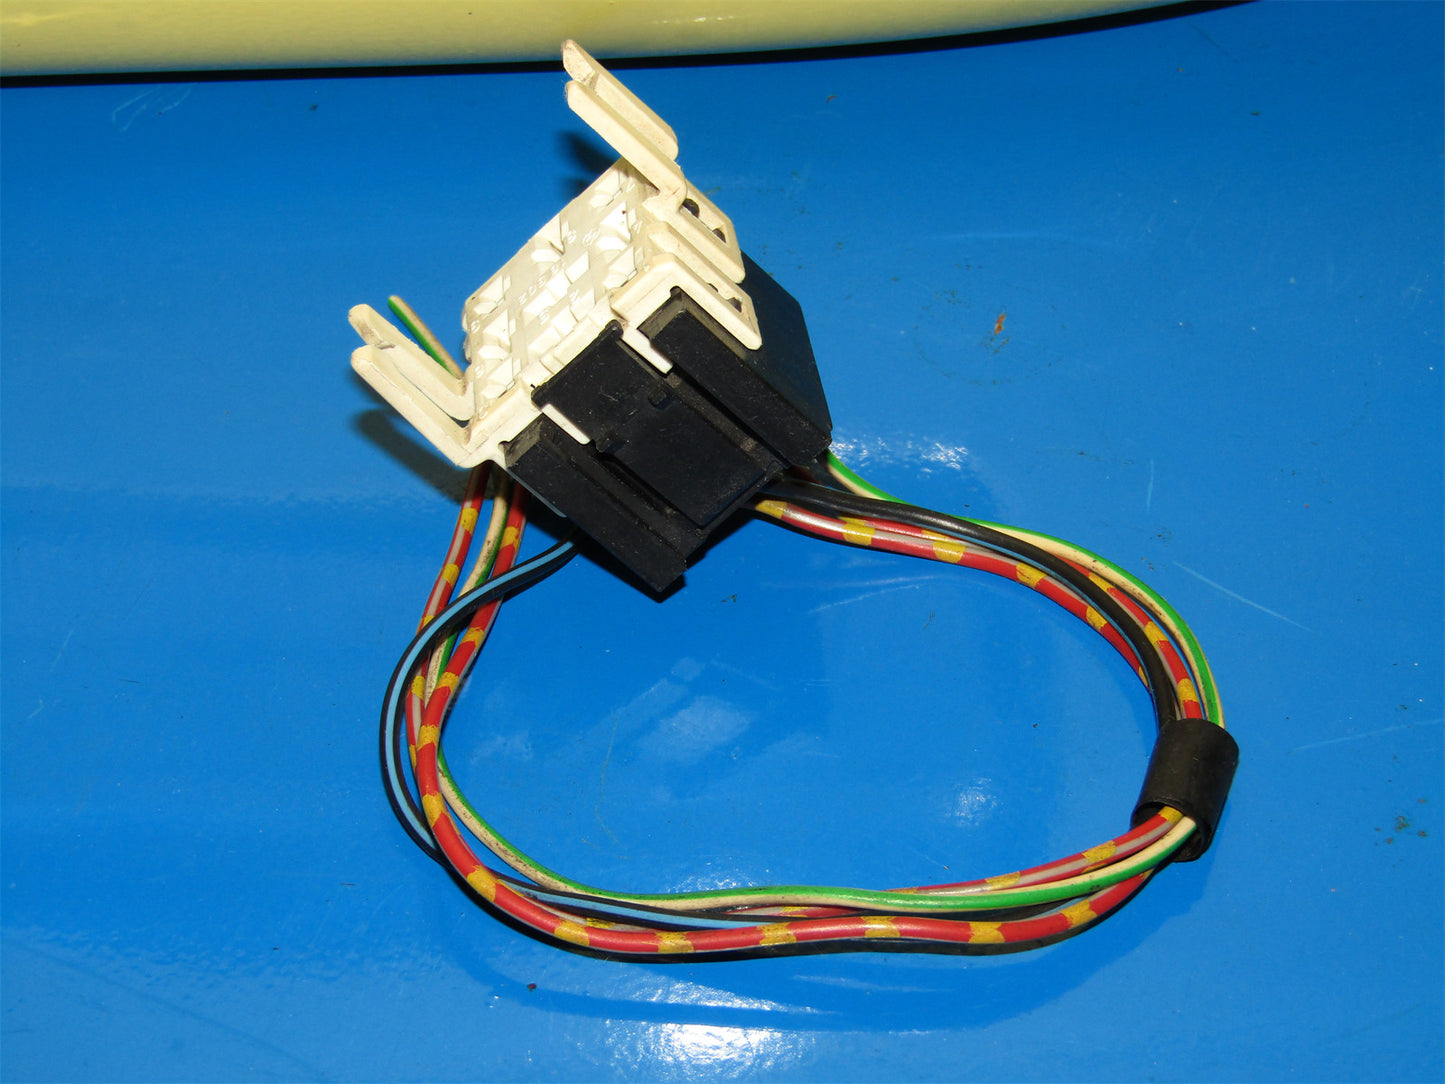 92-95 BMW 325i OEM V23134-K59-X222 Relay Pigtail Harness Connector